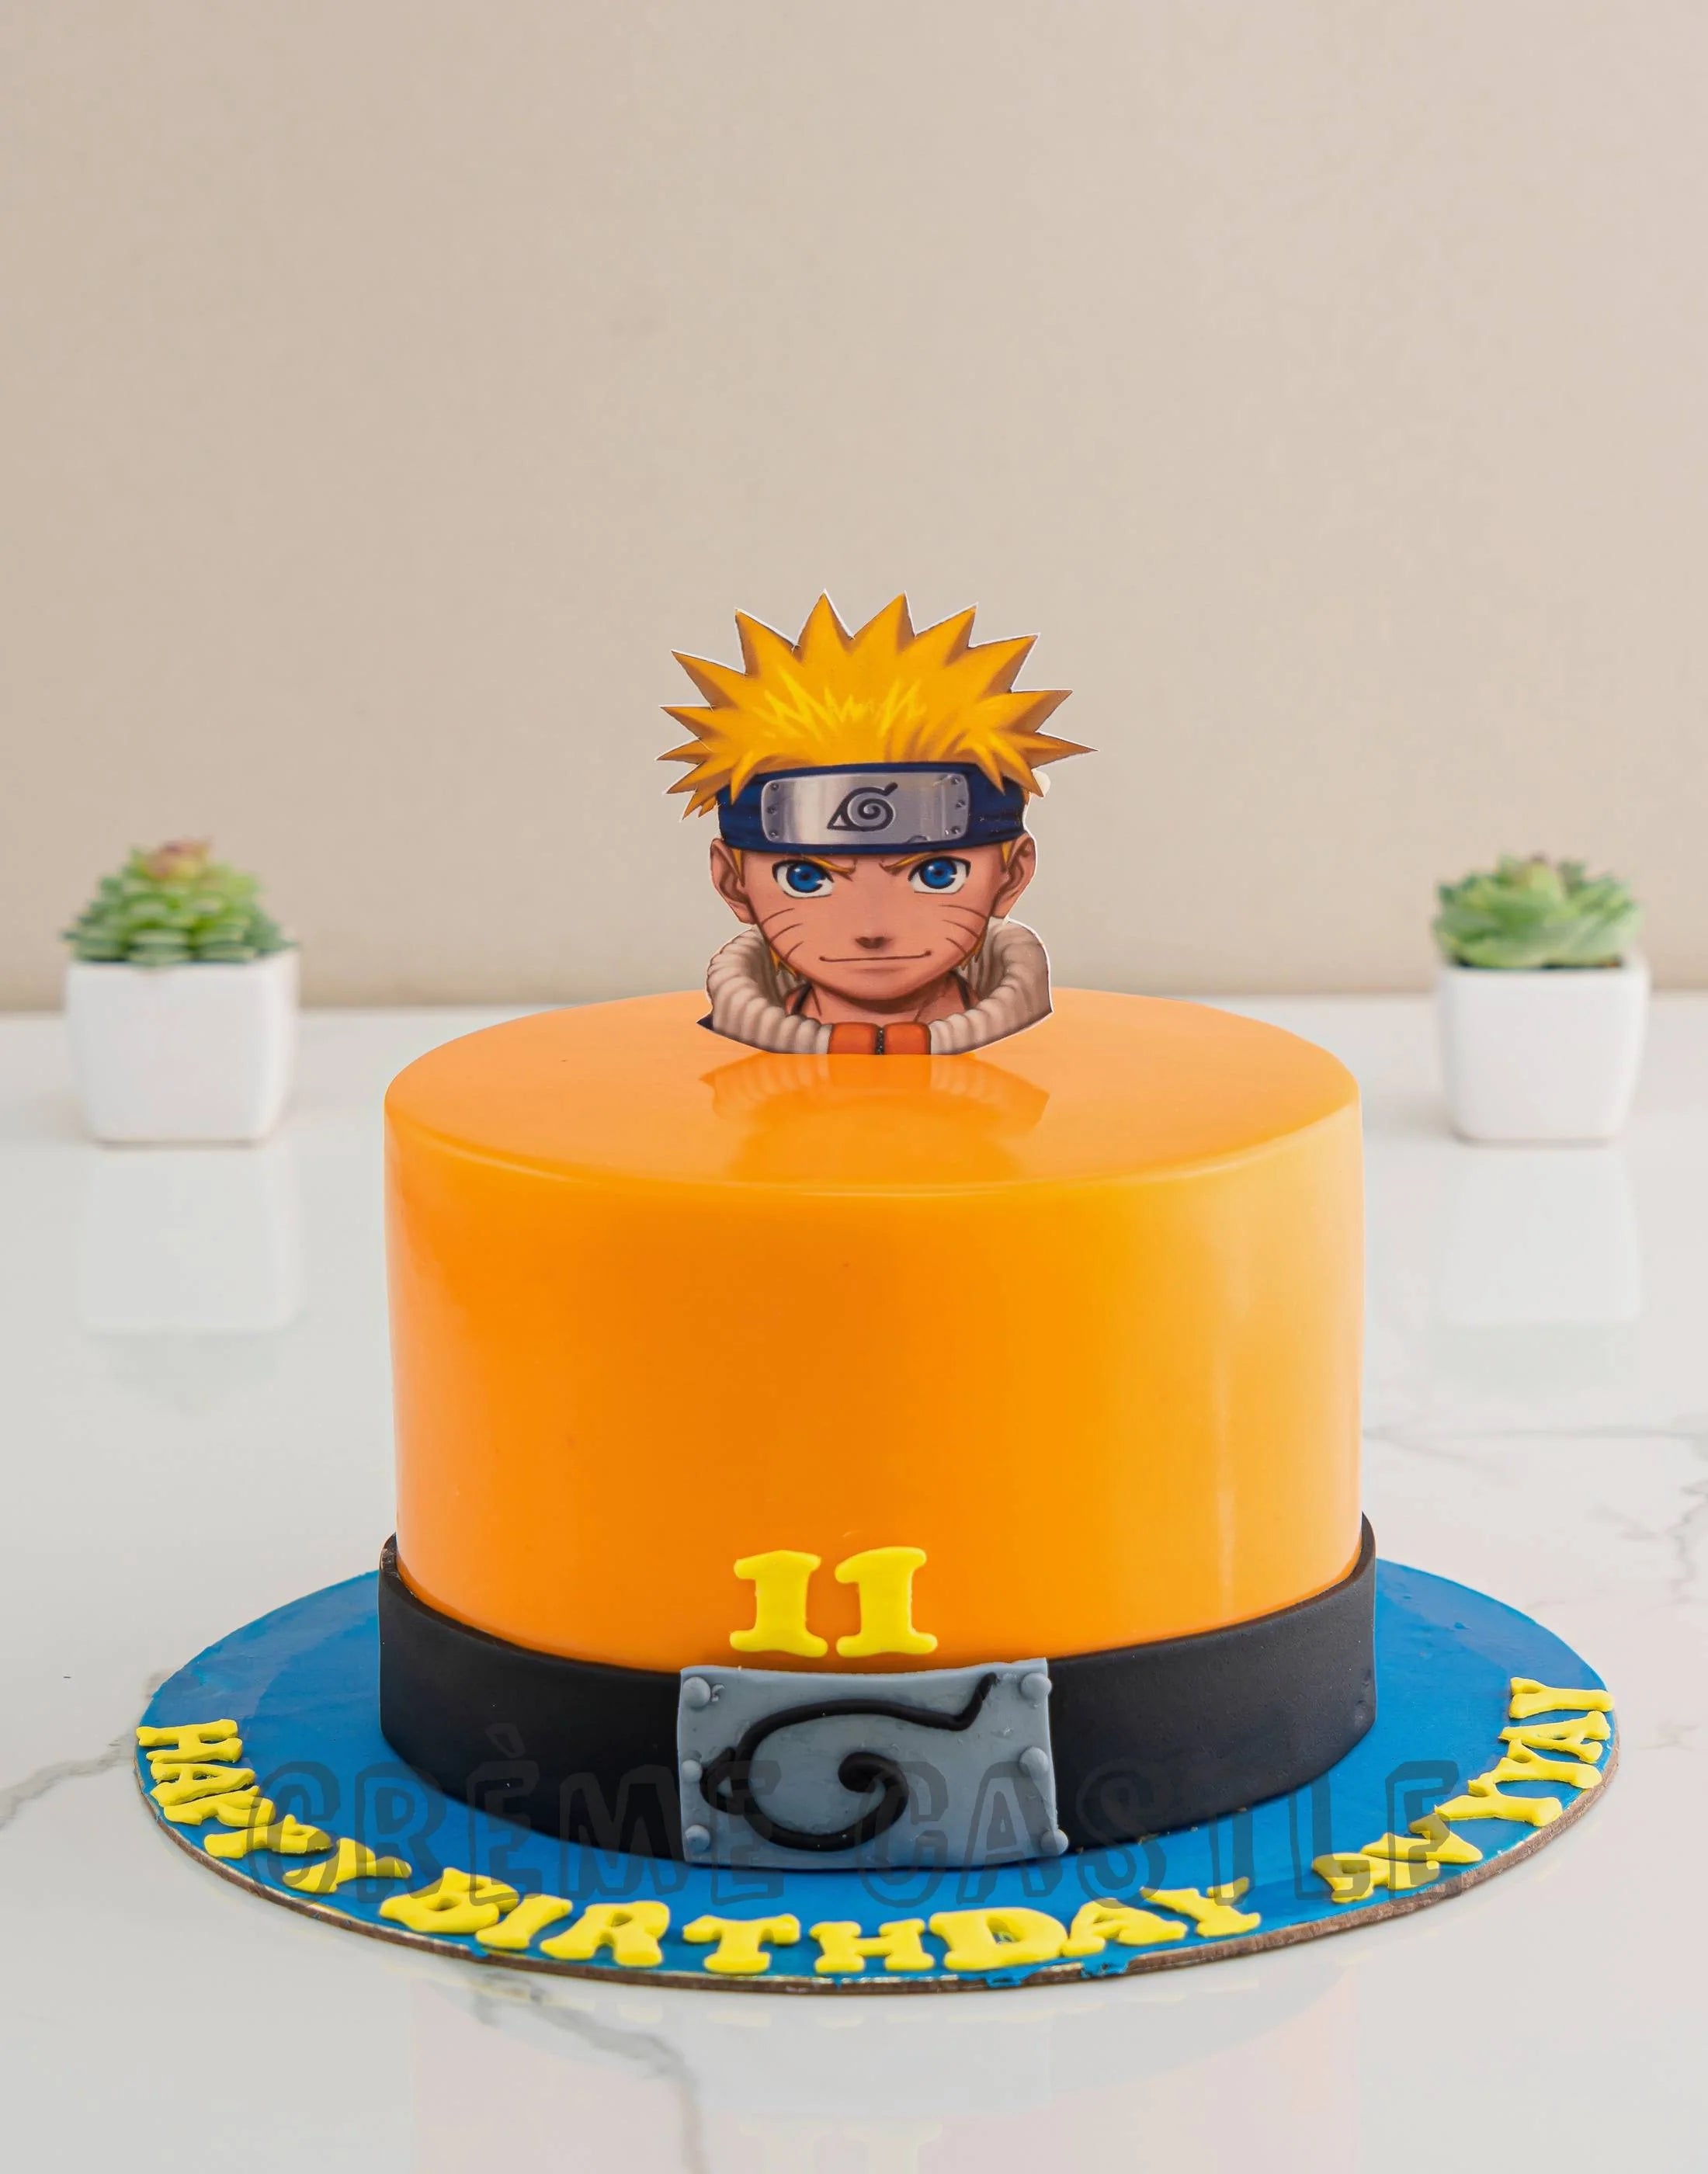 50 Best Naruto Cake Design Ideas for an Anime Fan's Birthday